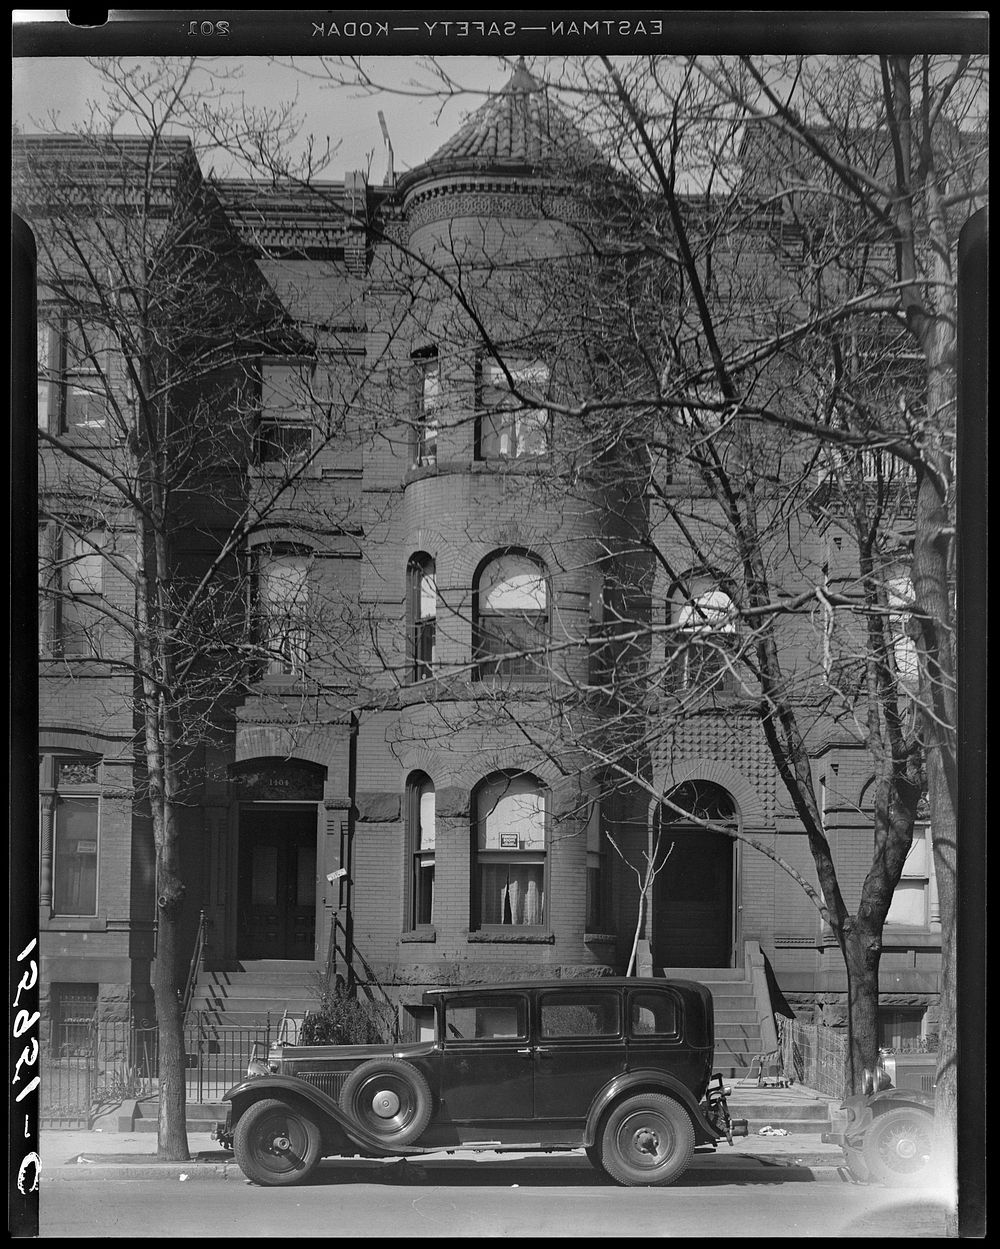 Rooming house. Washington, D.C.. Sourced from the Library of Congress.